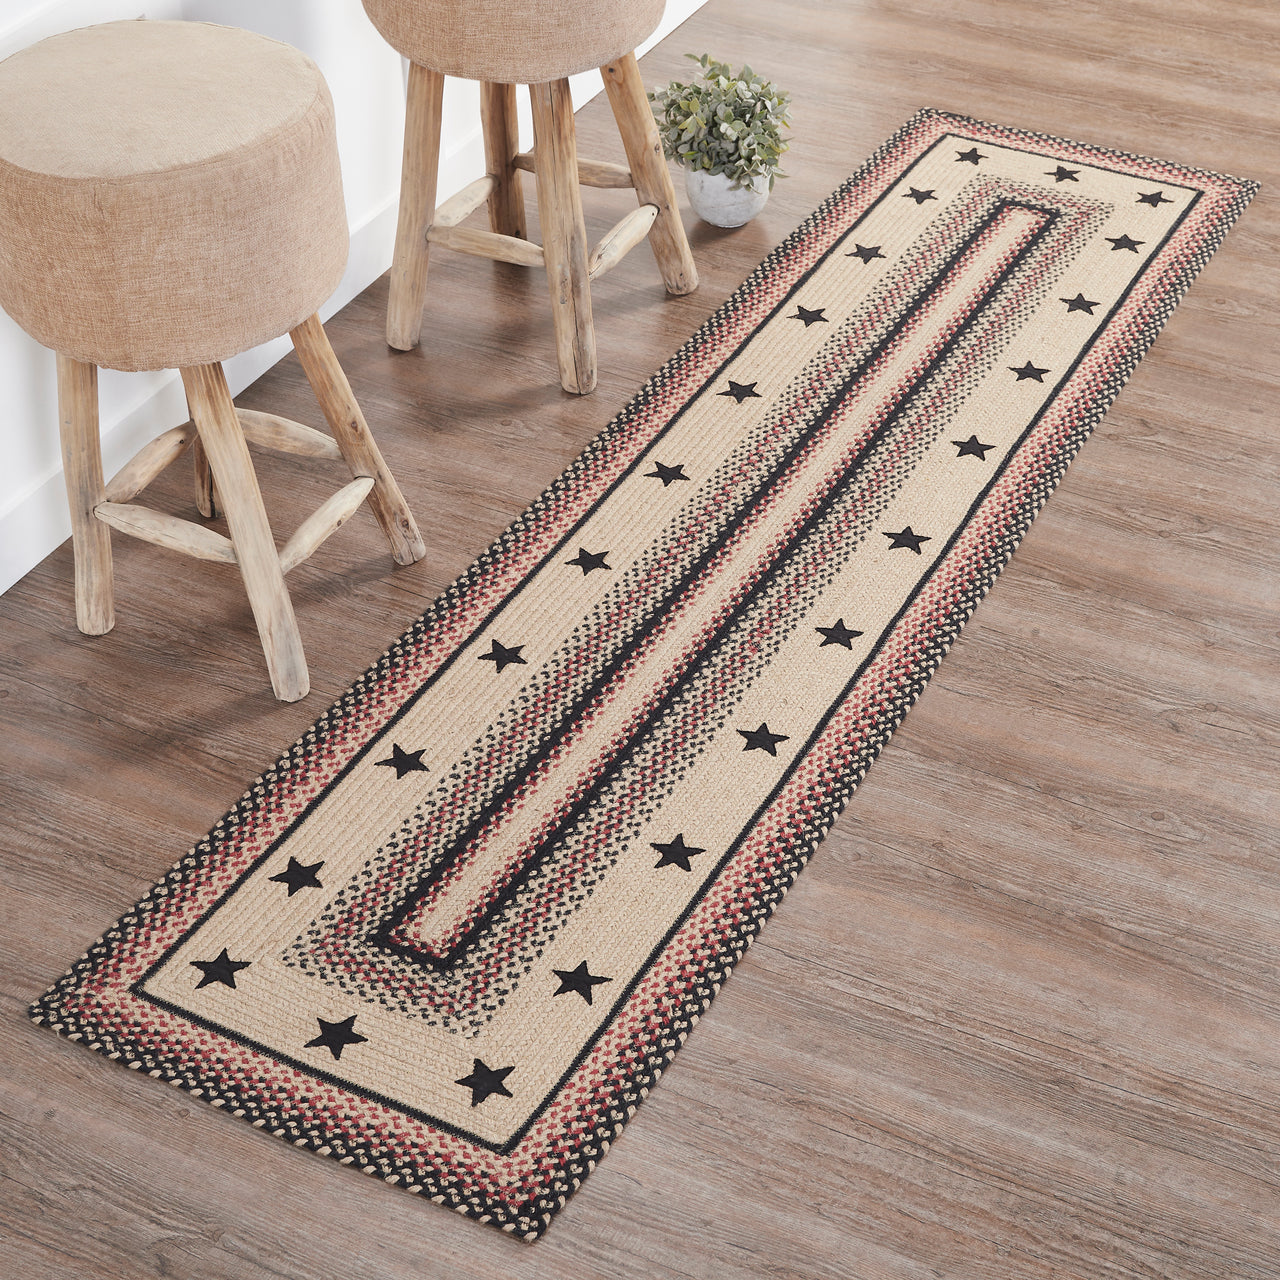 Colonial Star Jute Braided Rug/Runner Rect. with Rug Pad 2'x8' VHC Brands